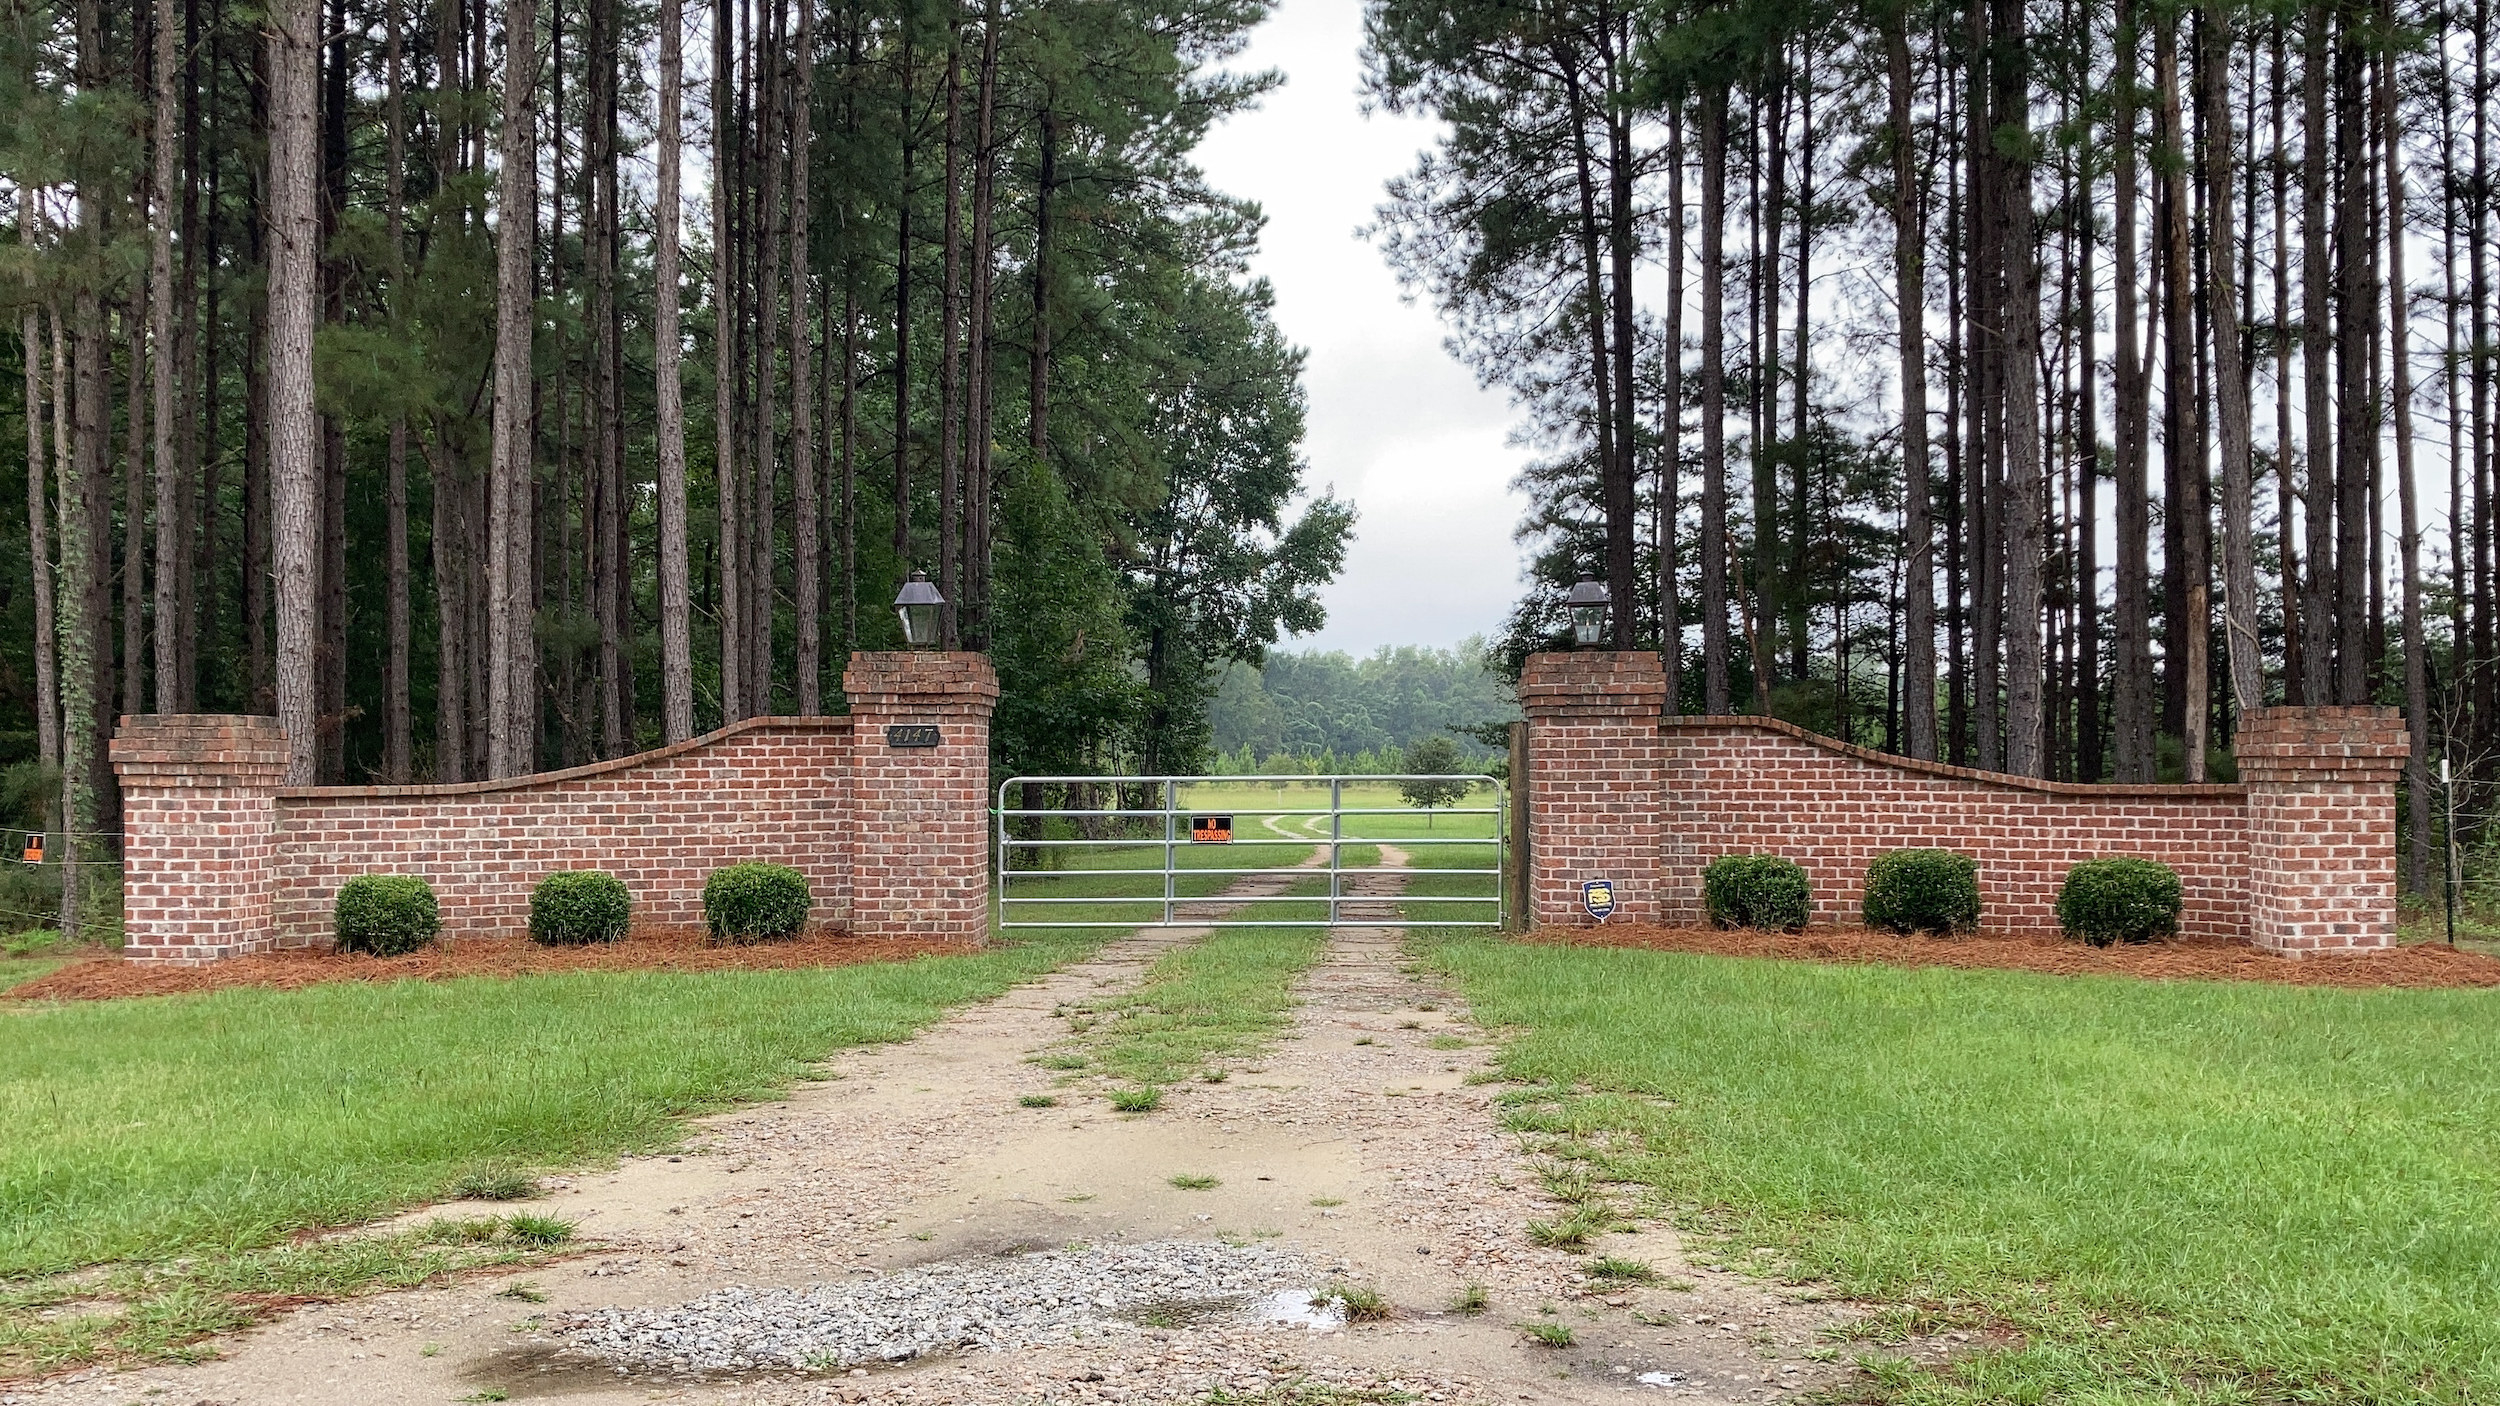 A brick-framed gate with a &quot;no trespassing&quot; sign in front of a road leading into a meadow, surrounded by tall, spindly trees